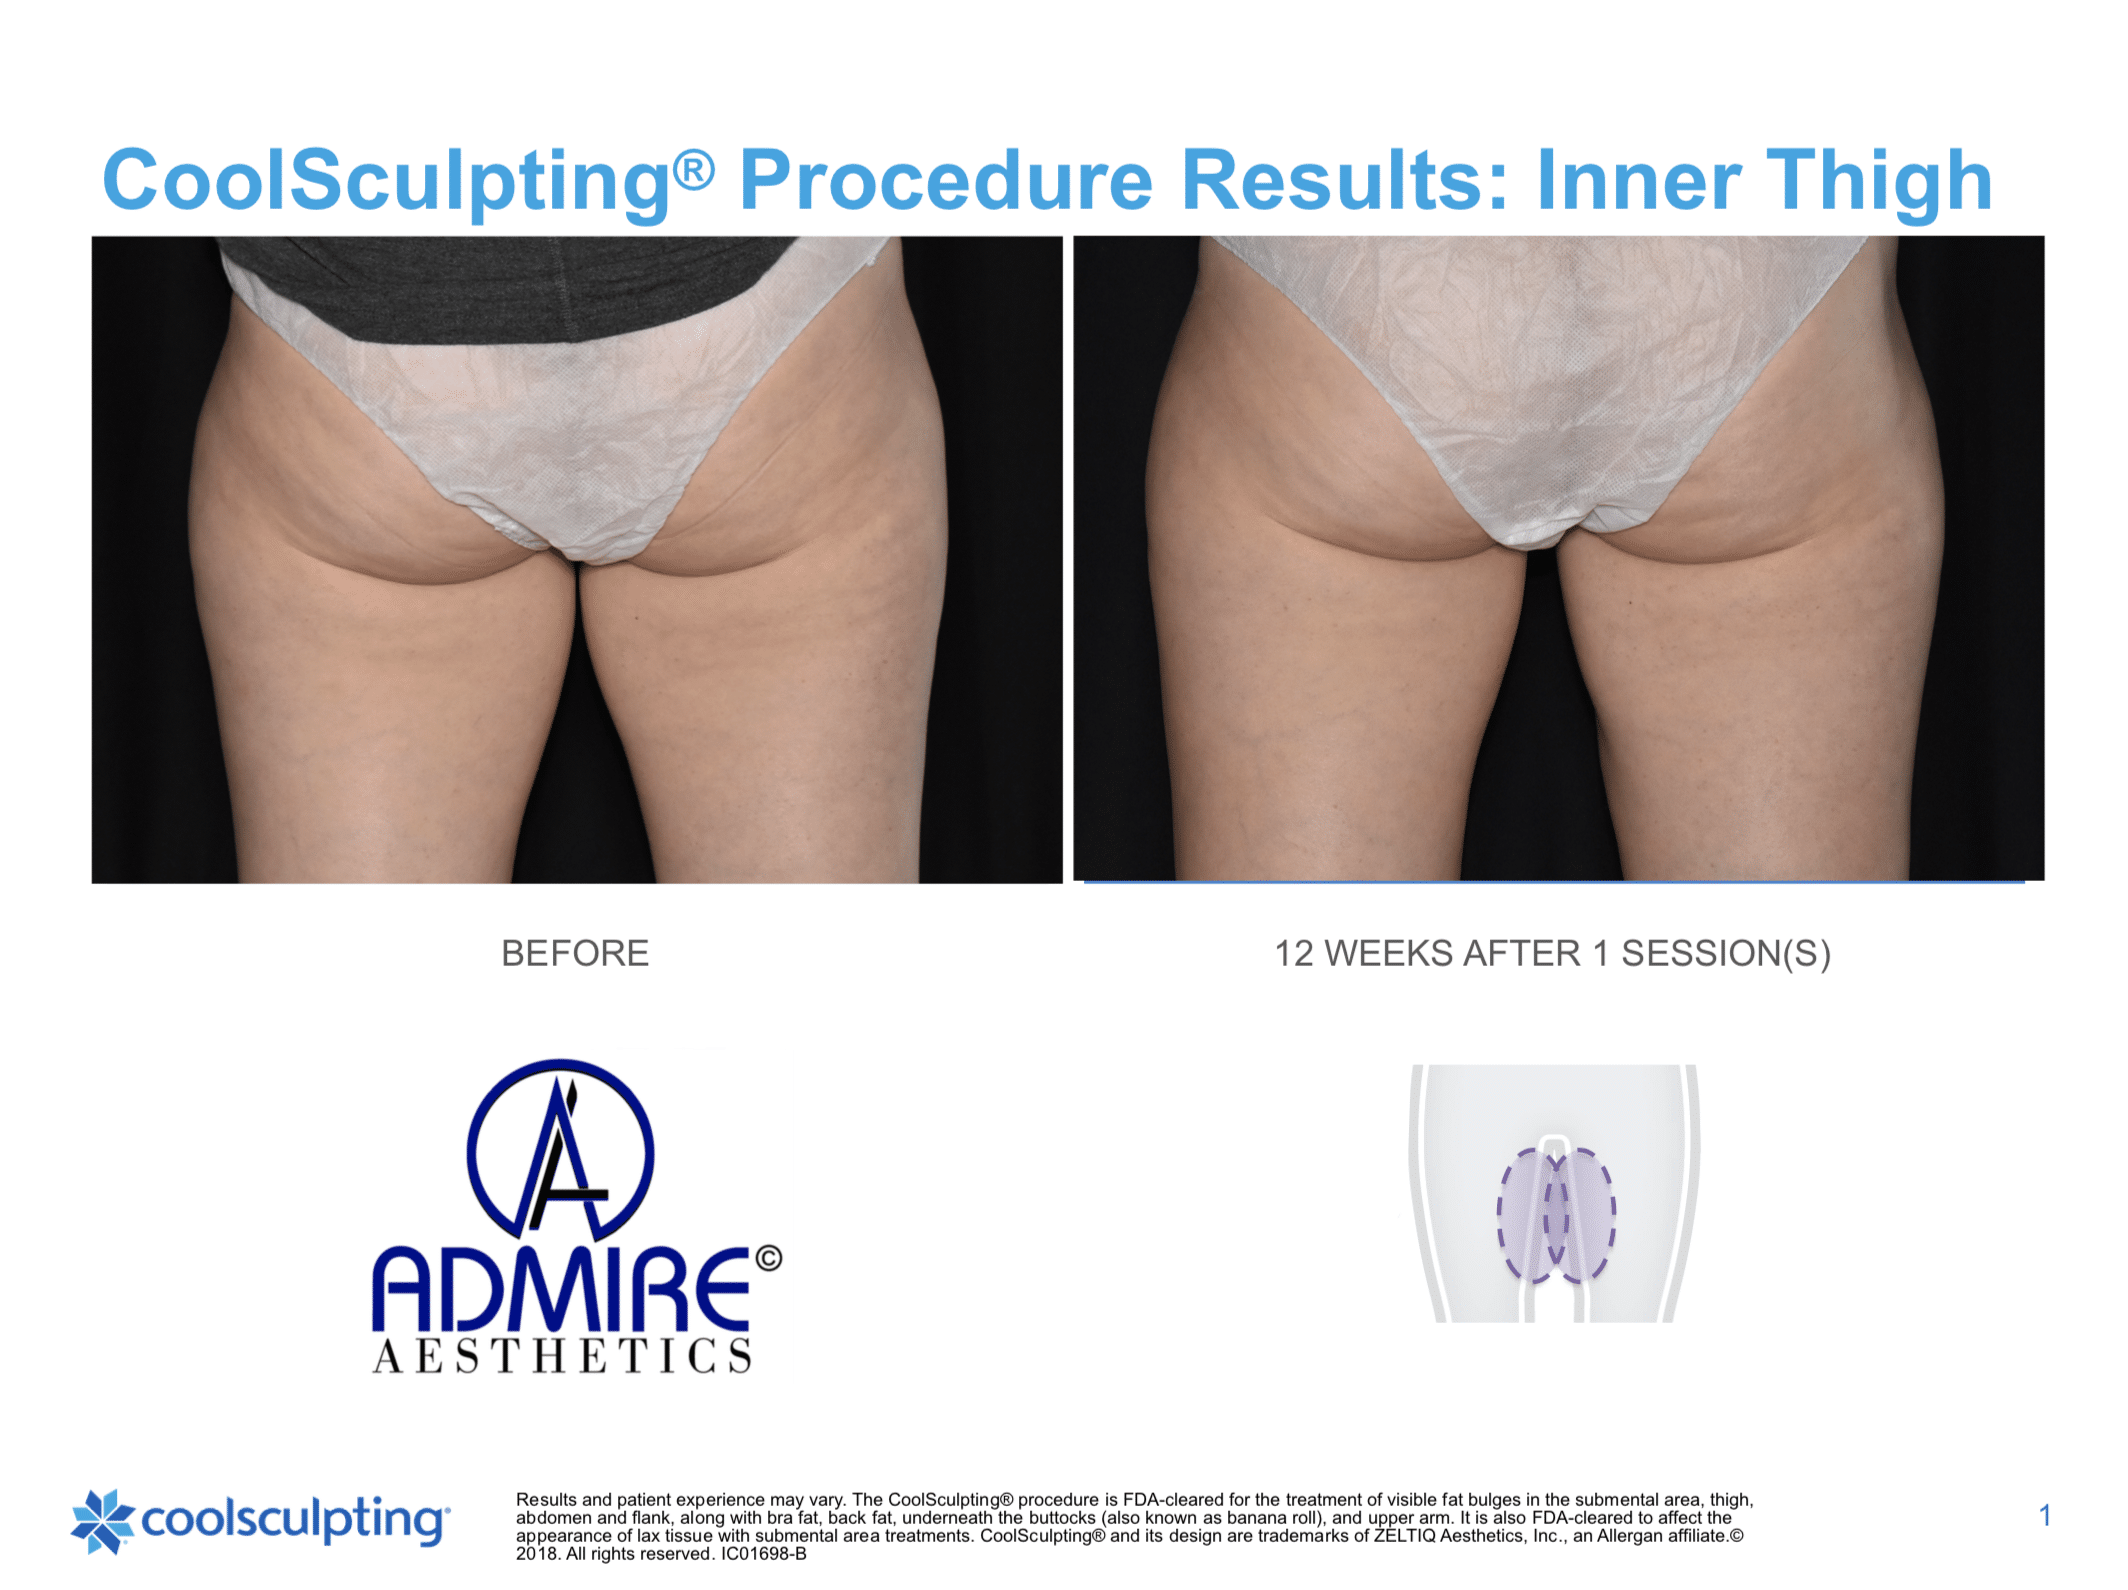 Buttocks before and after coolsculpting treatment at Admire Aesthetics.